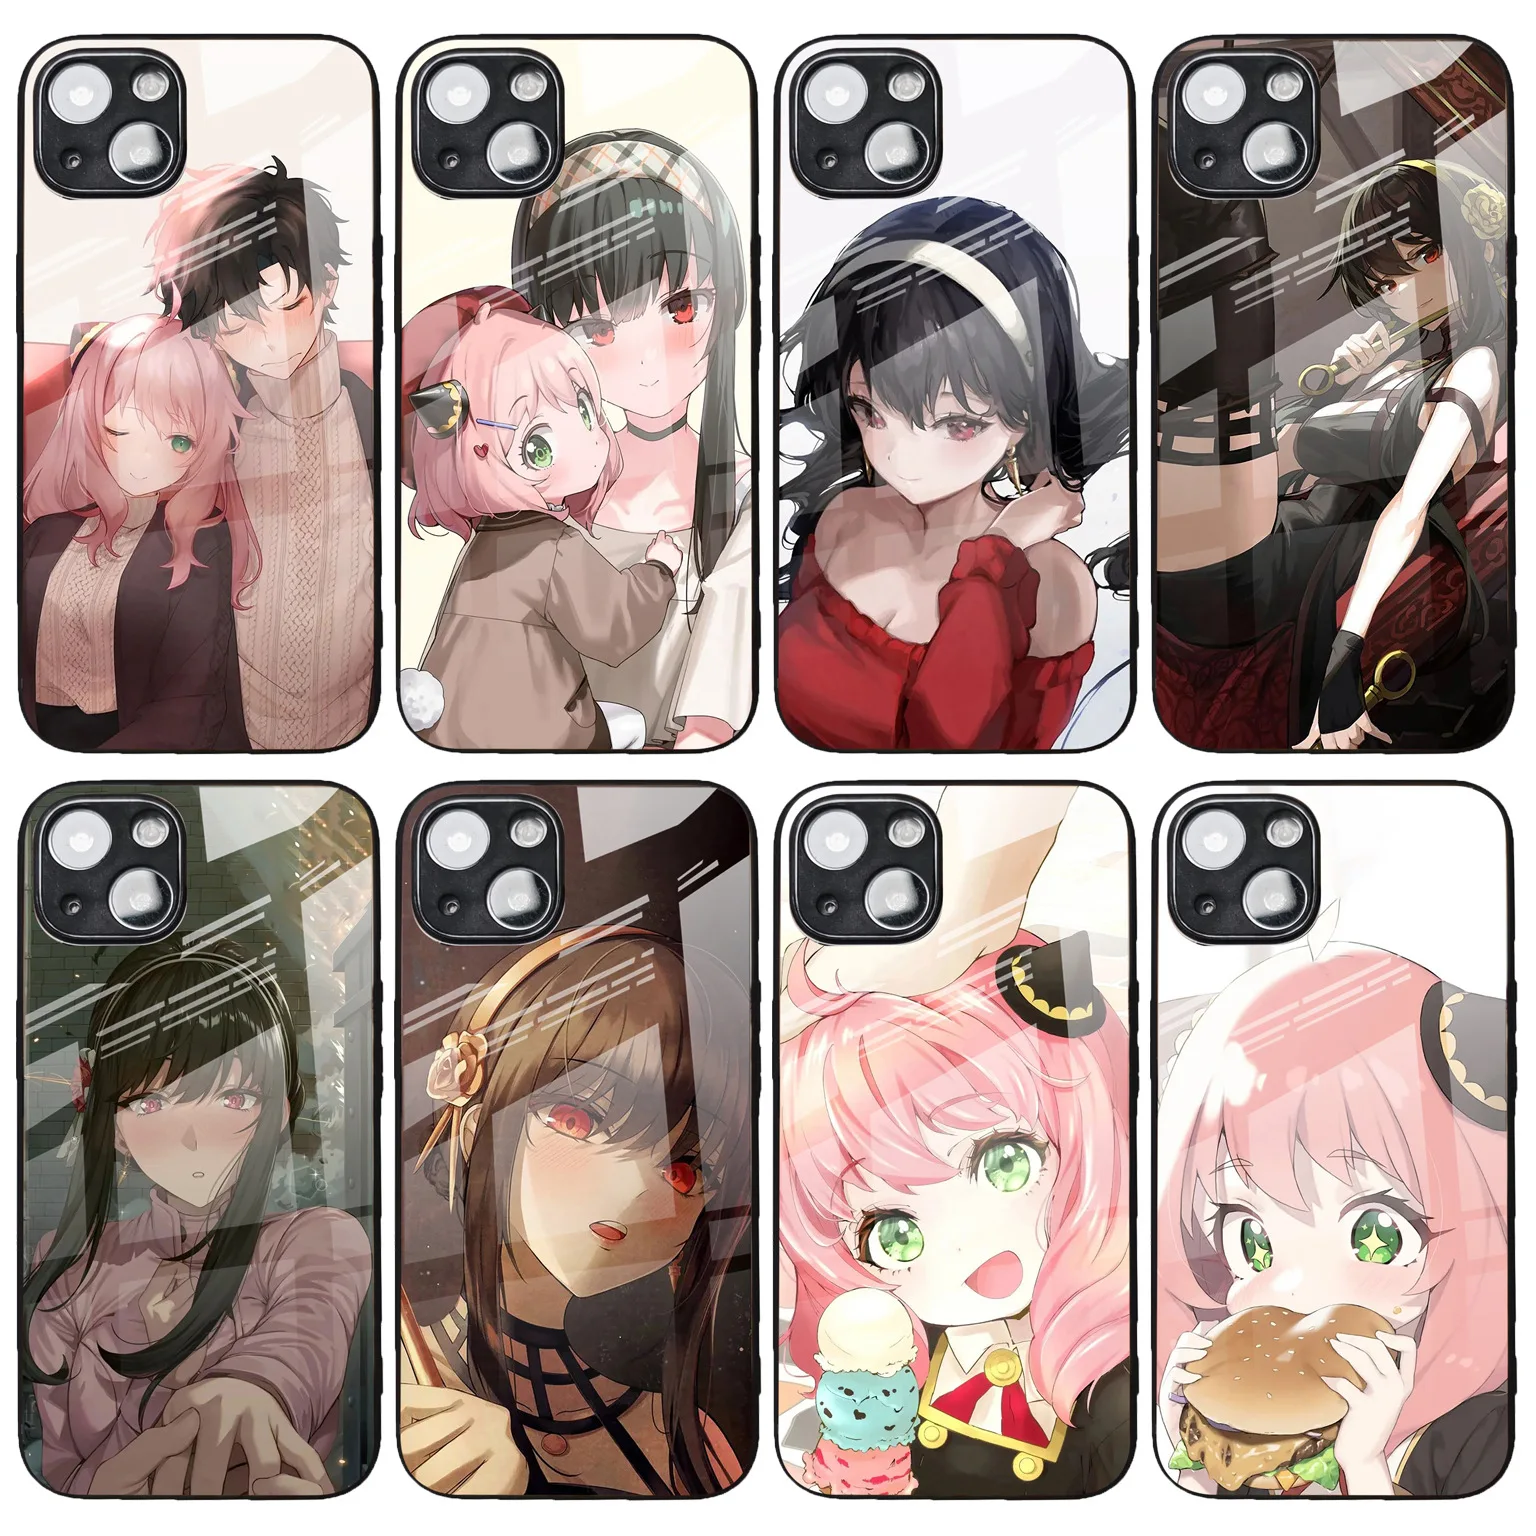 Anime Spy X Family Anya Forger Cuteiphone 13 12 11 Pro Xr Xs Mobile Phone  Cases - Buy Phone Cases,Anime Mobile Phone Cases,Mobile Phone Cases Product  on 